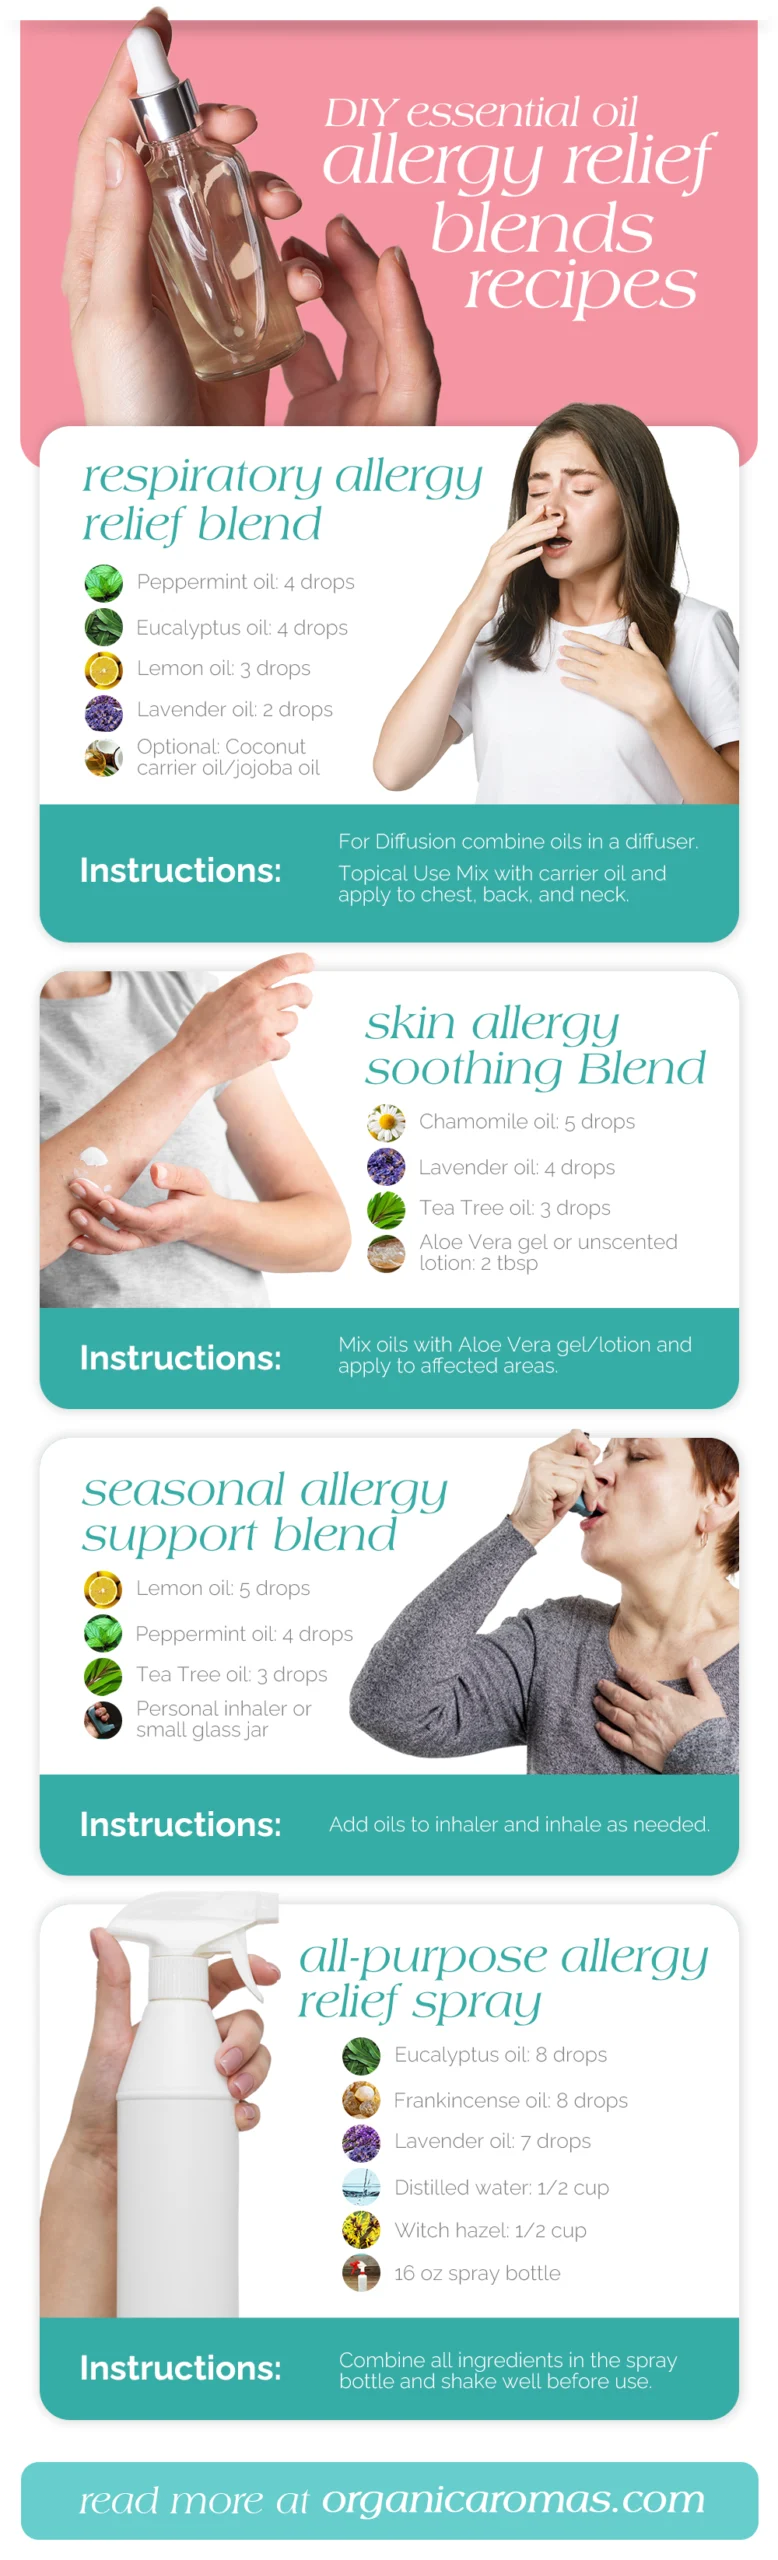 DIY Essential Oil Allergy Relief Blends Recipes Infographic by Organic Aromas